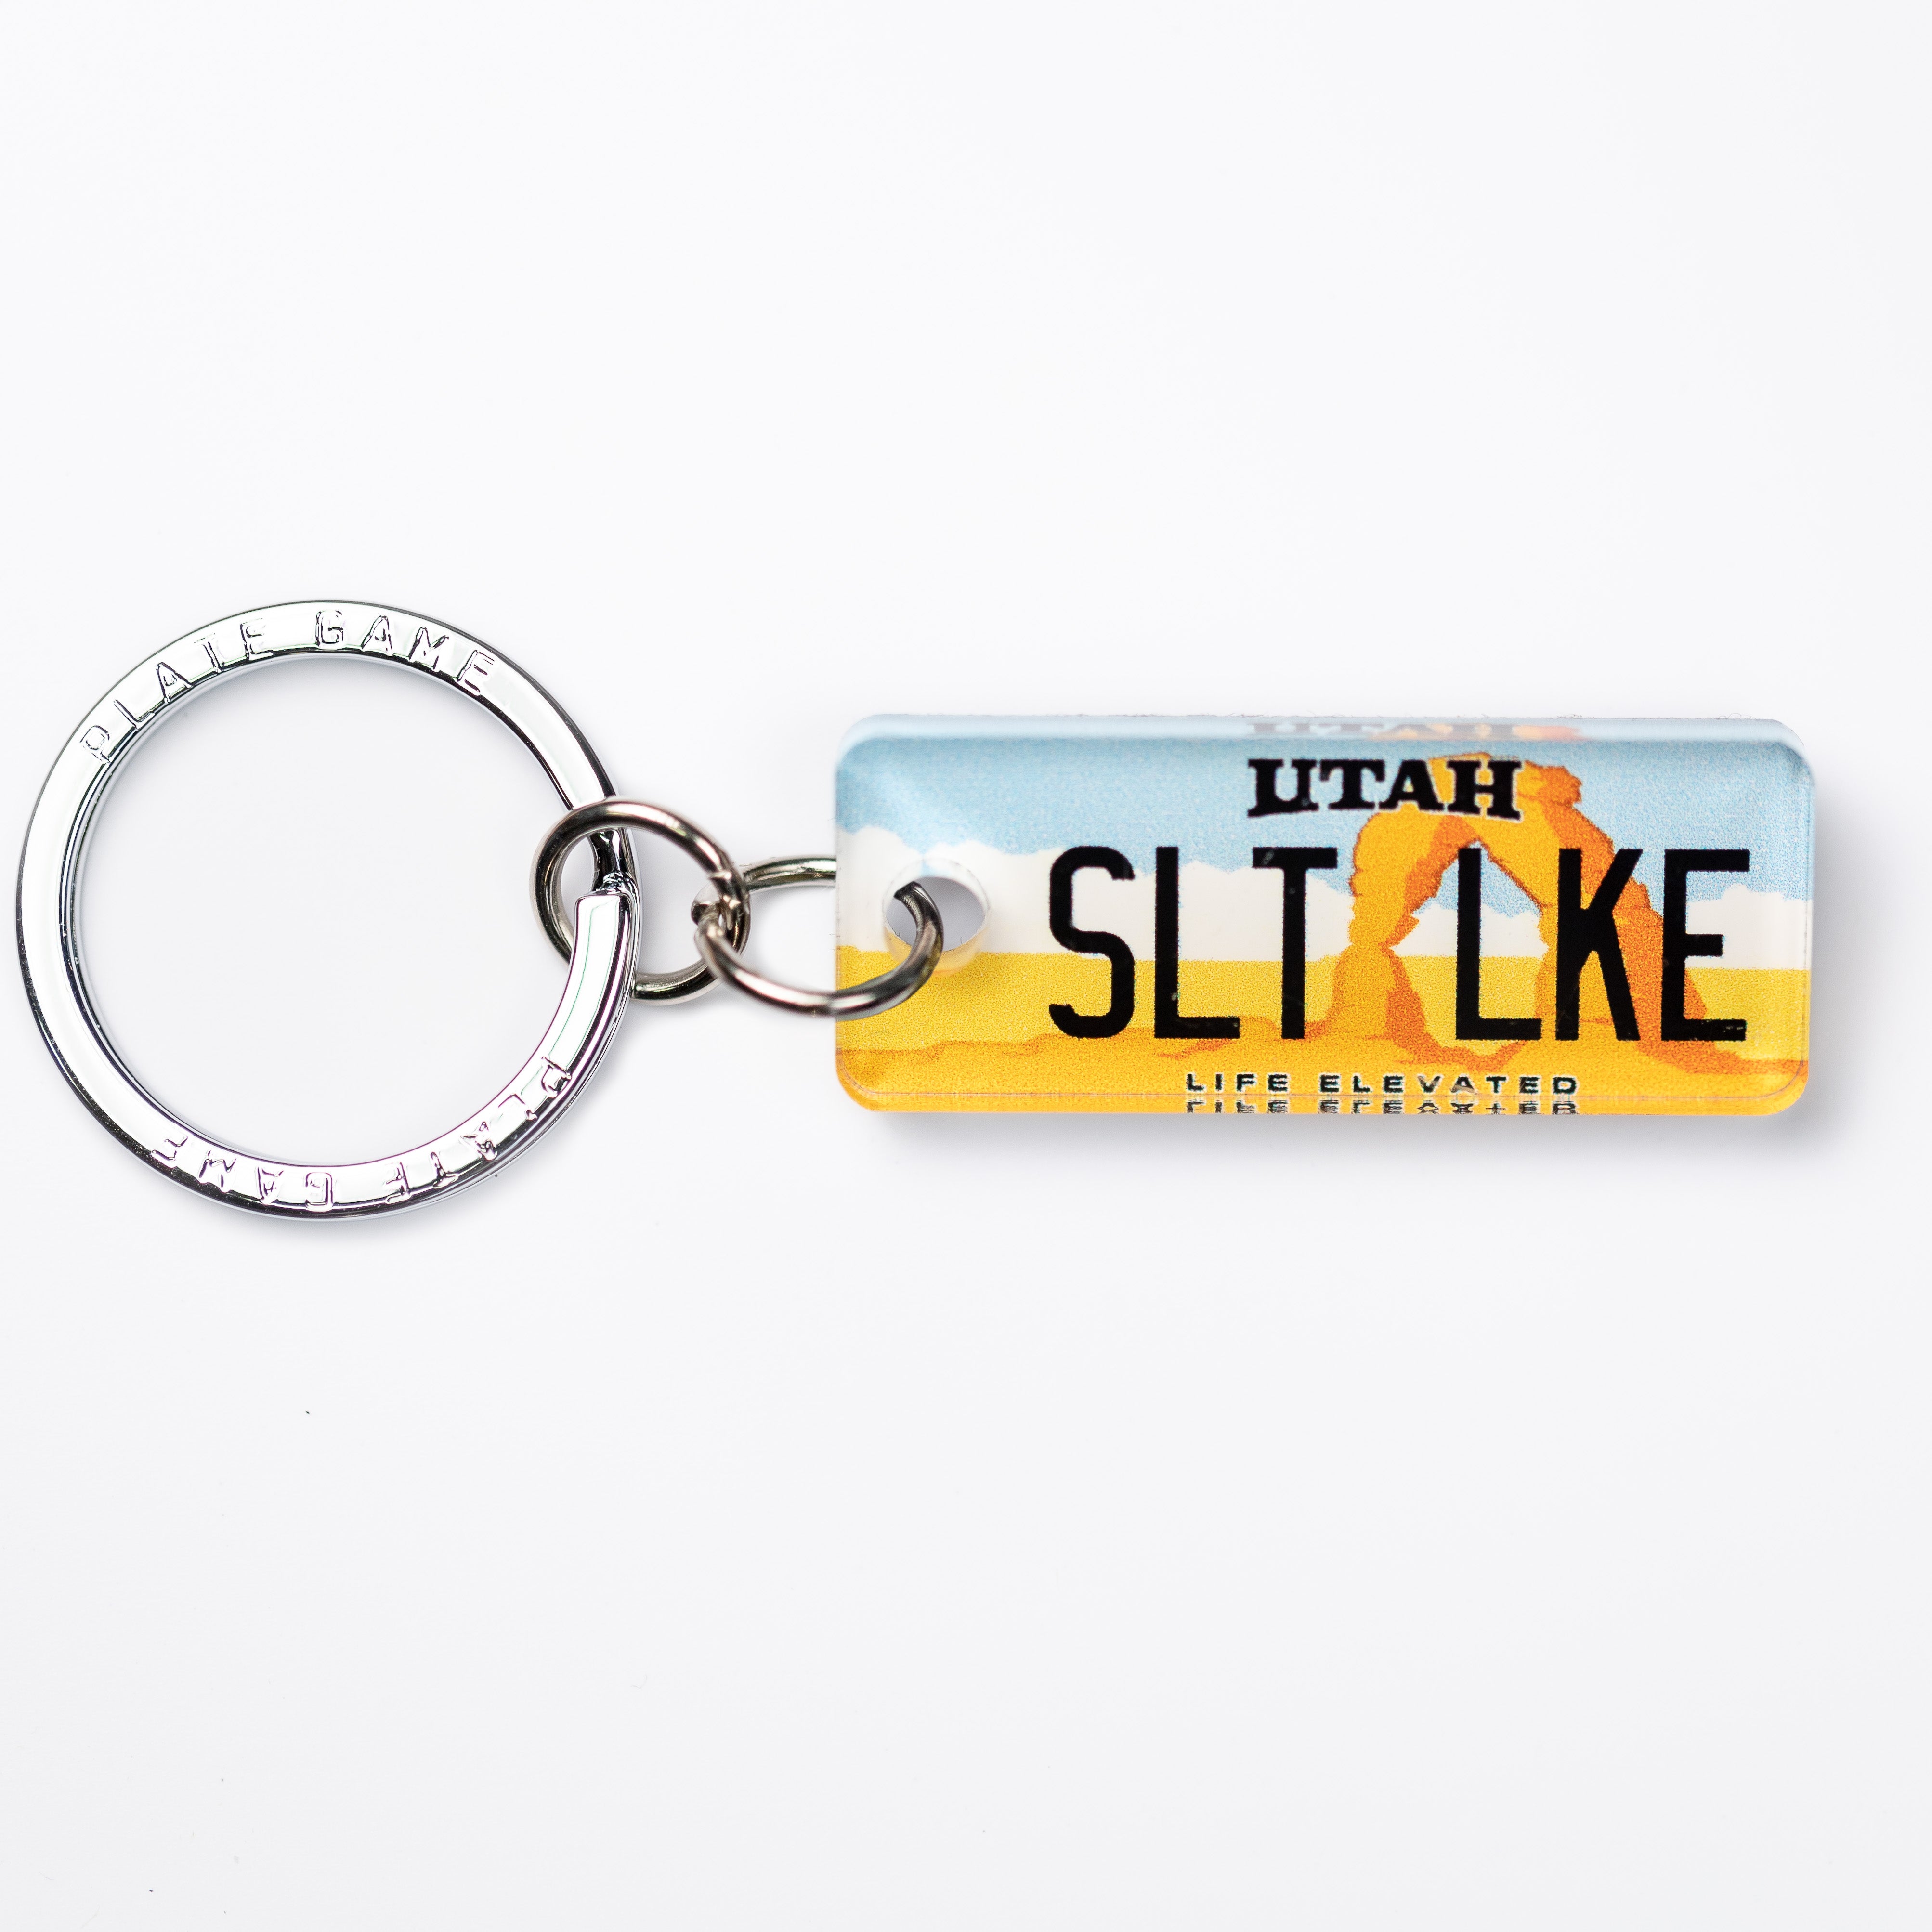 New Orleans Louisiana State License Plate Tag Novelty Key Chain KC-6179 - Novelty Products - Gift Items - Personalized & Customizable Options- Smart